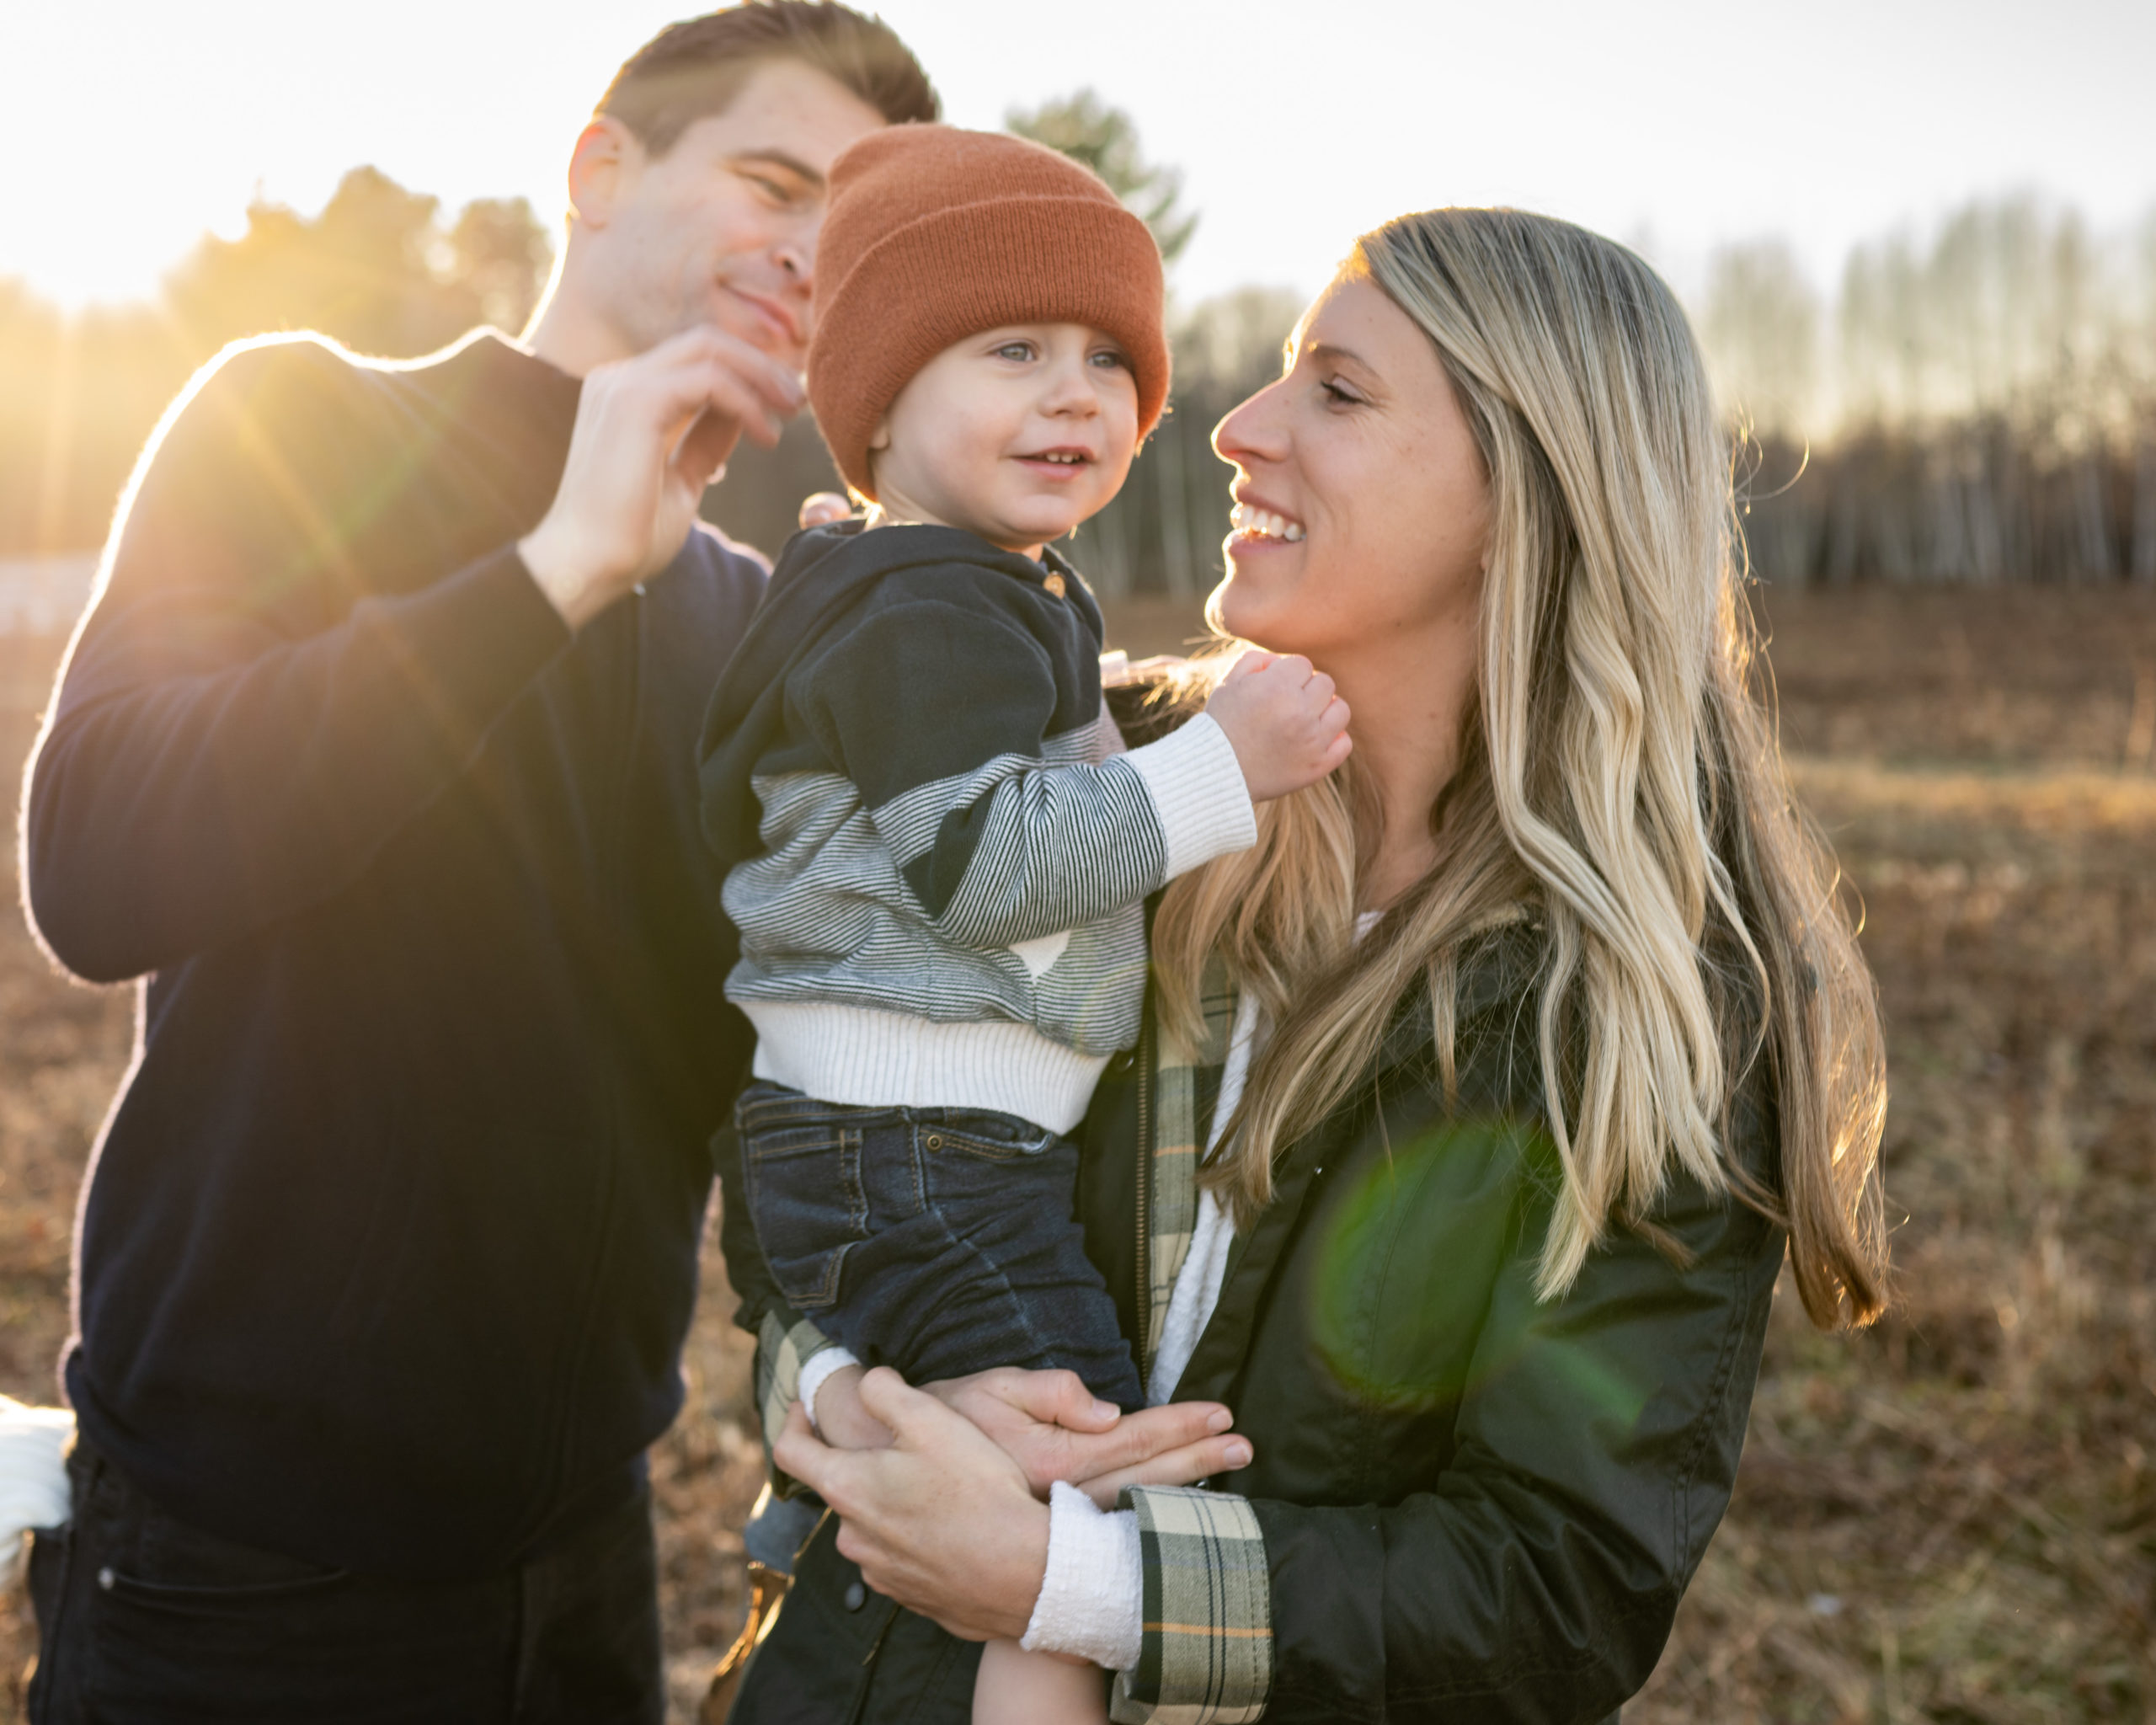 What to wear to a family photo session